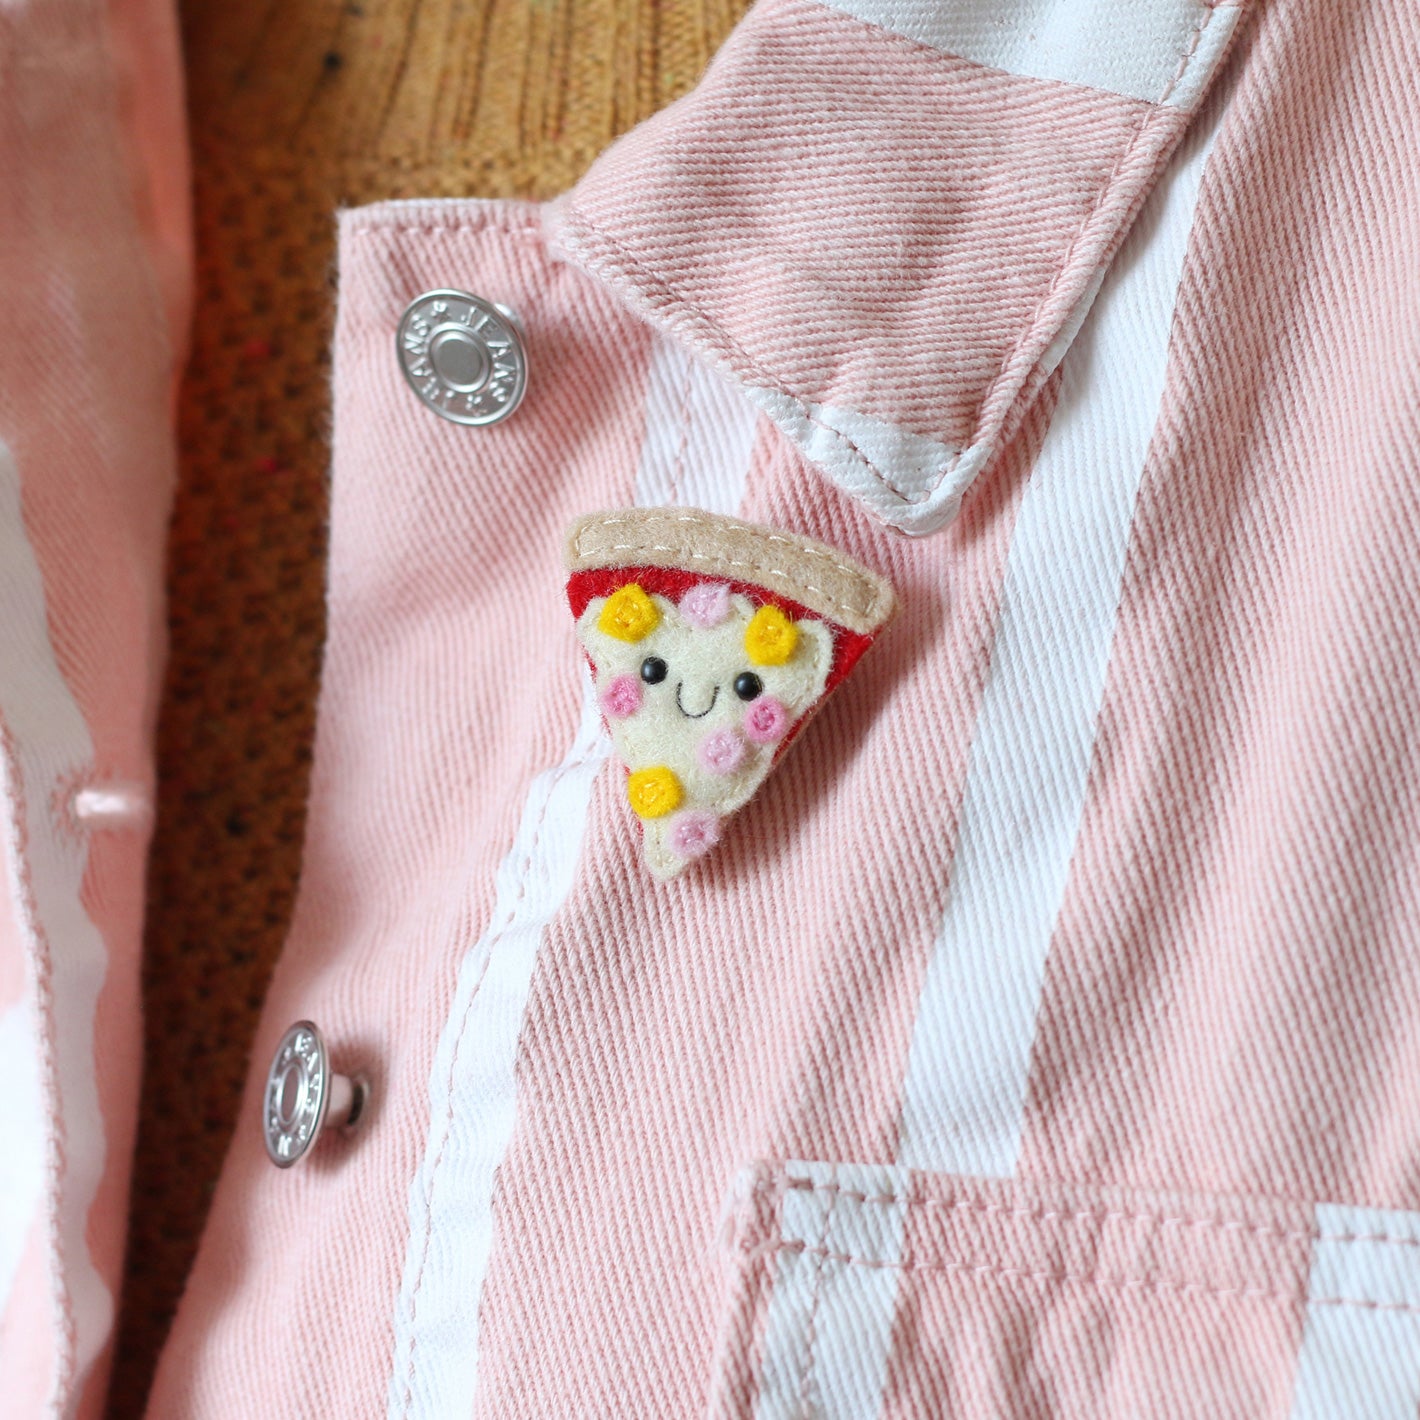 ham and pineapple pizza felt brooch modelled on a pink and white striped denim jacket